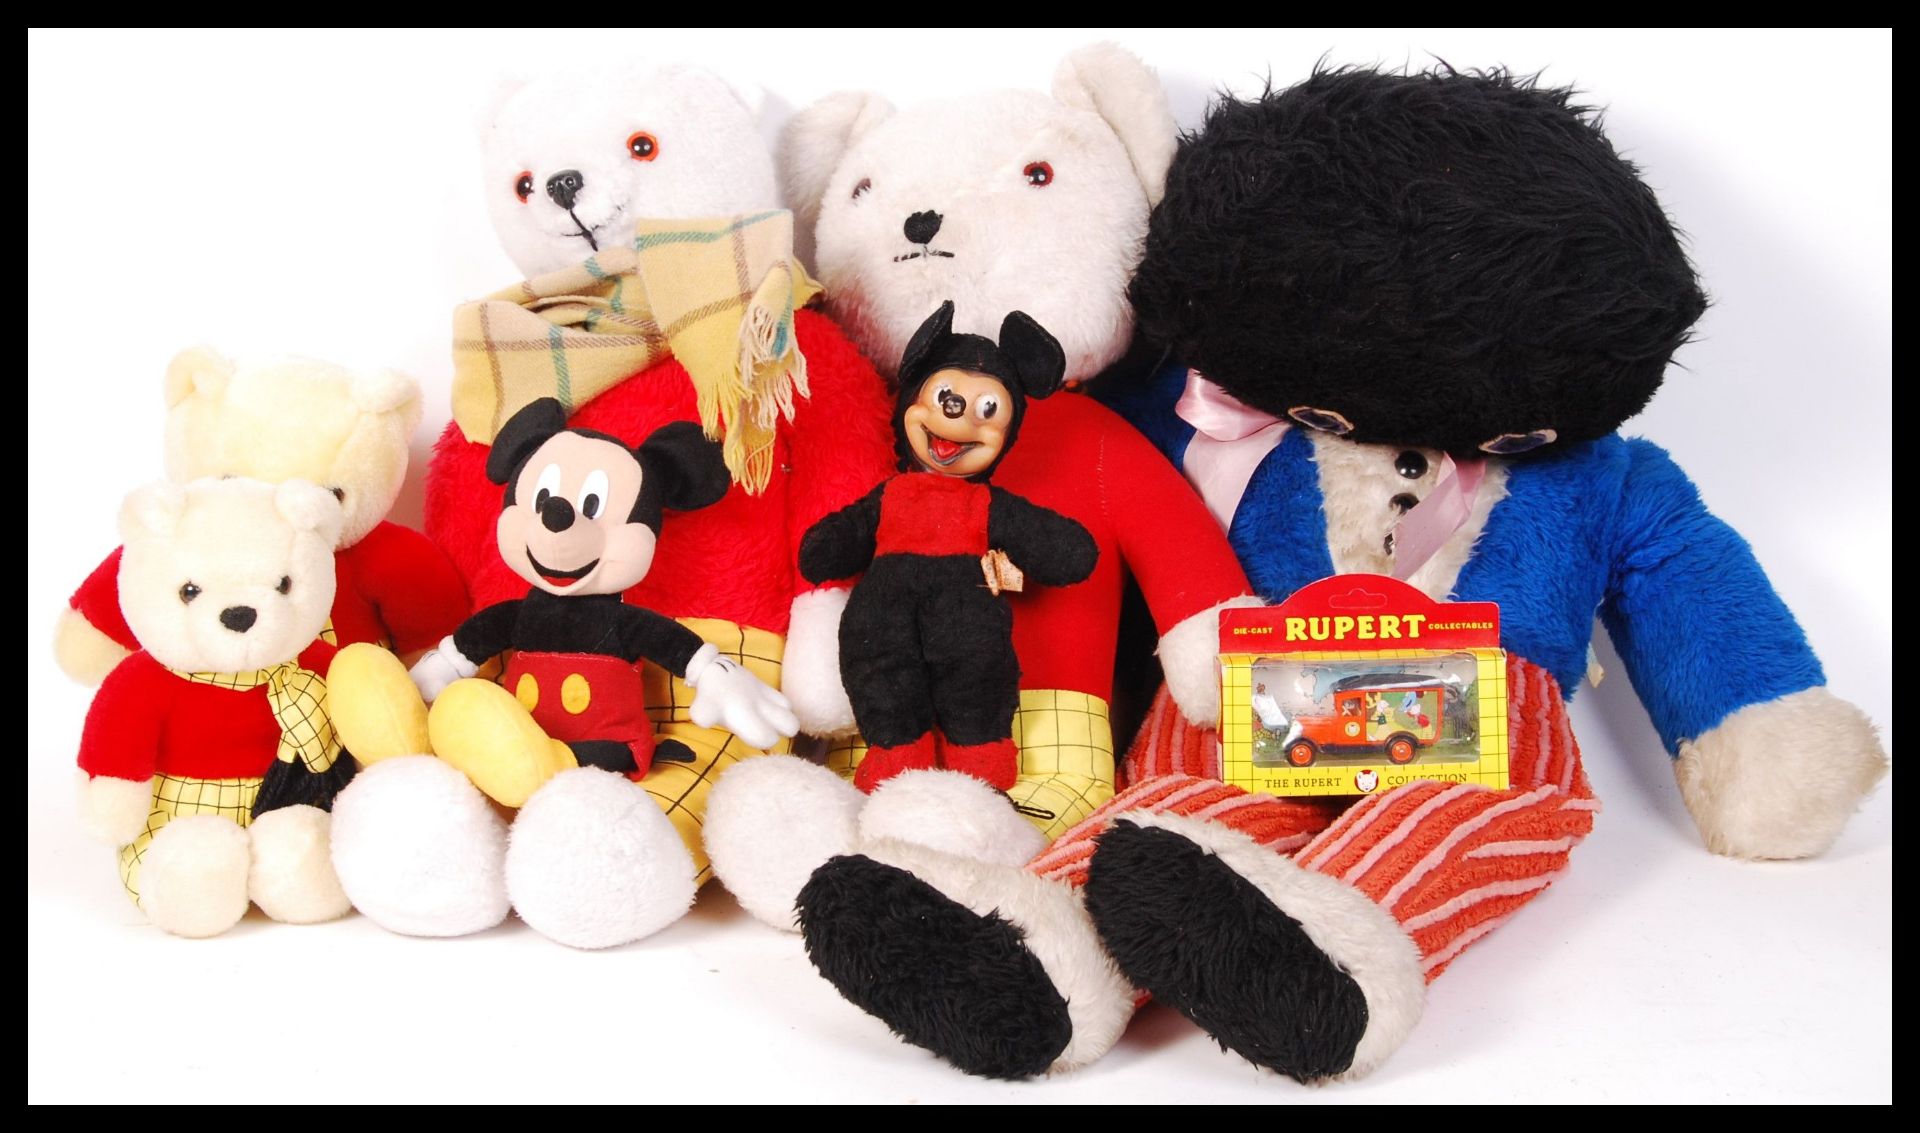 ASSORTED VINTAGE PLUSH TEDDY BEARS AND DOLLS